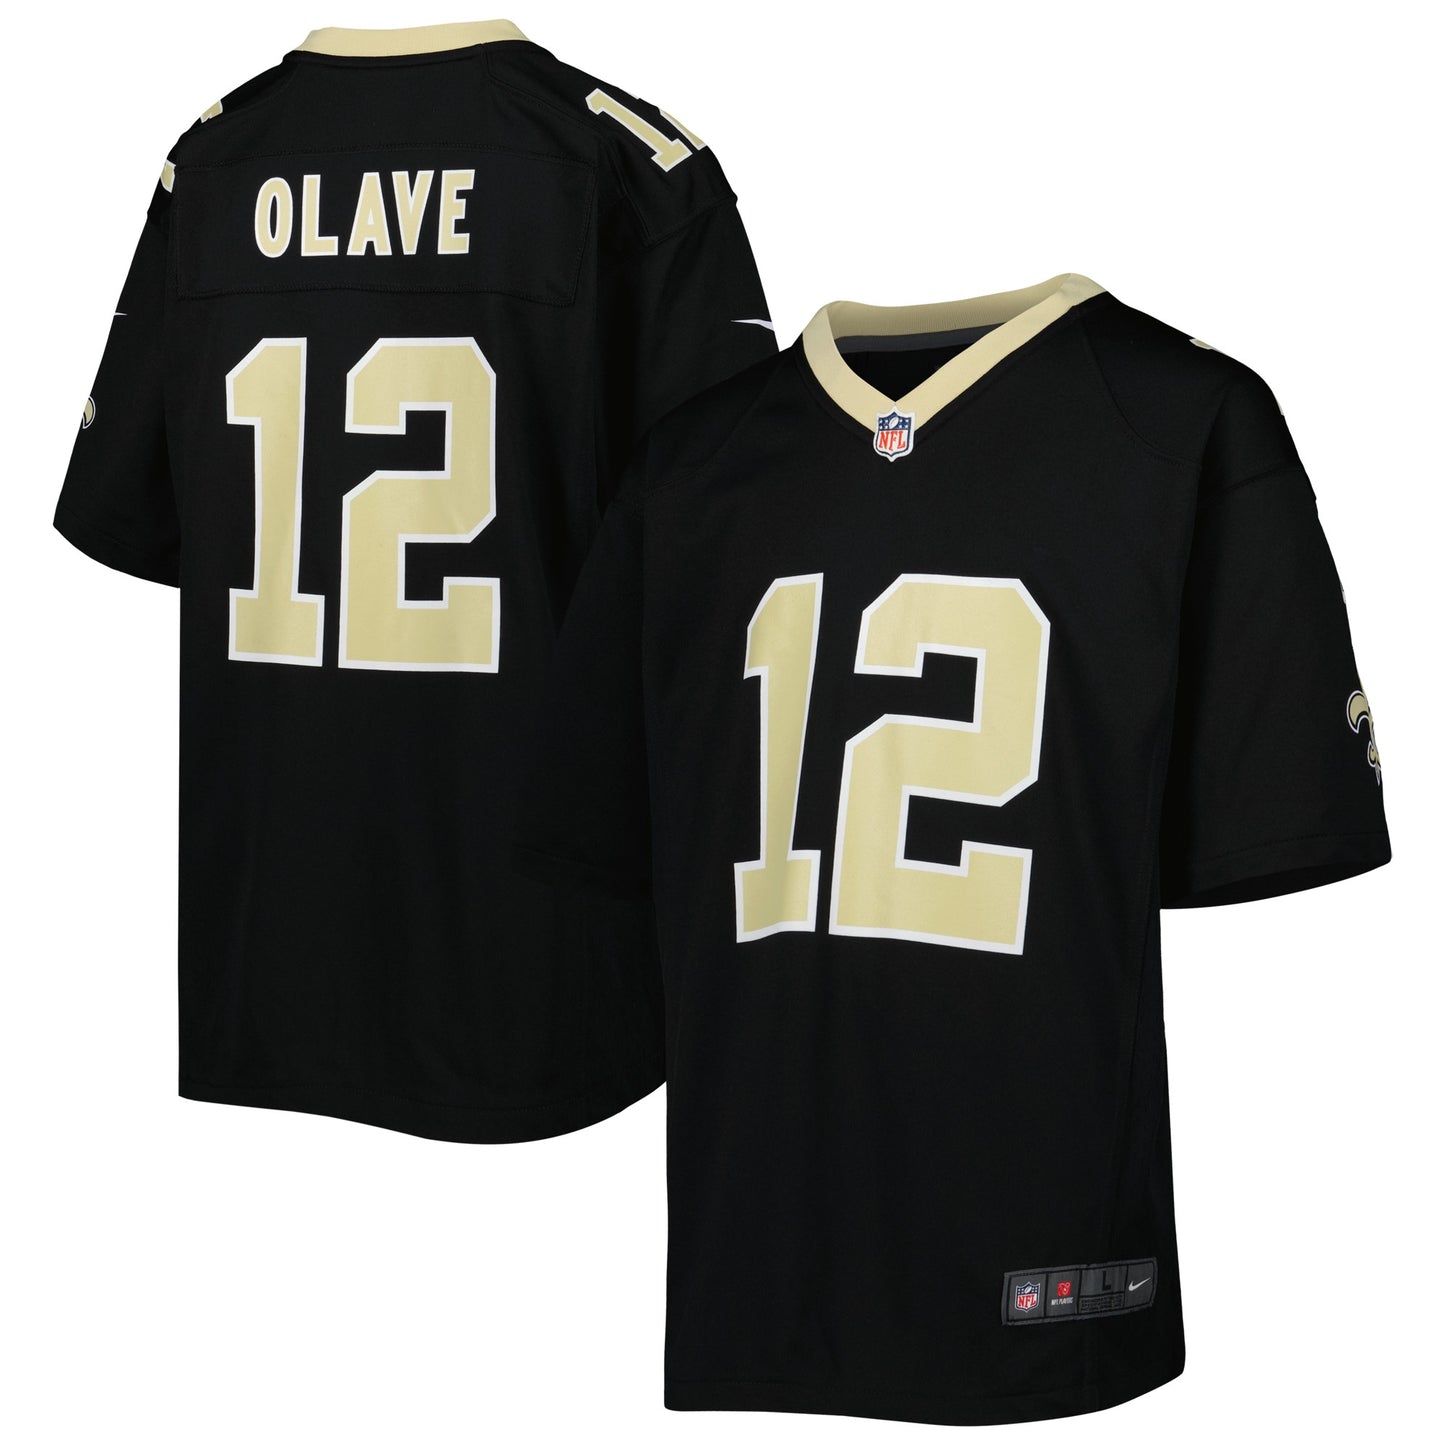 Chris Olave New Orleans Saints Nike Youth Game Jersey - Black